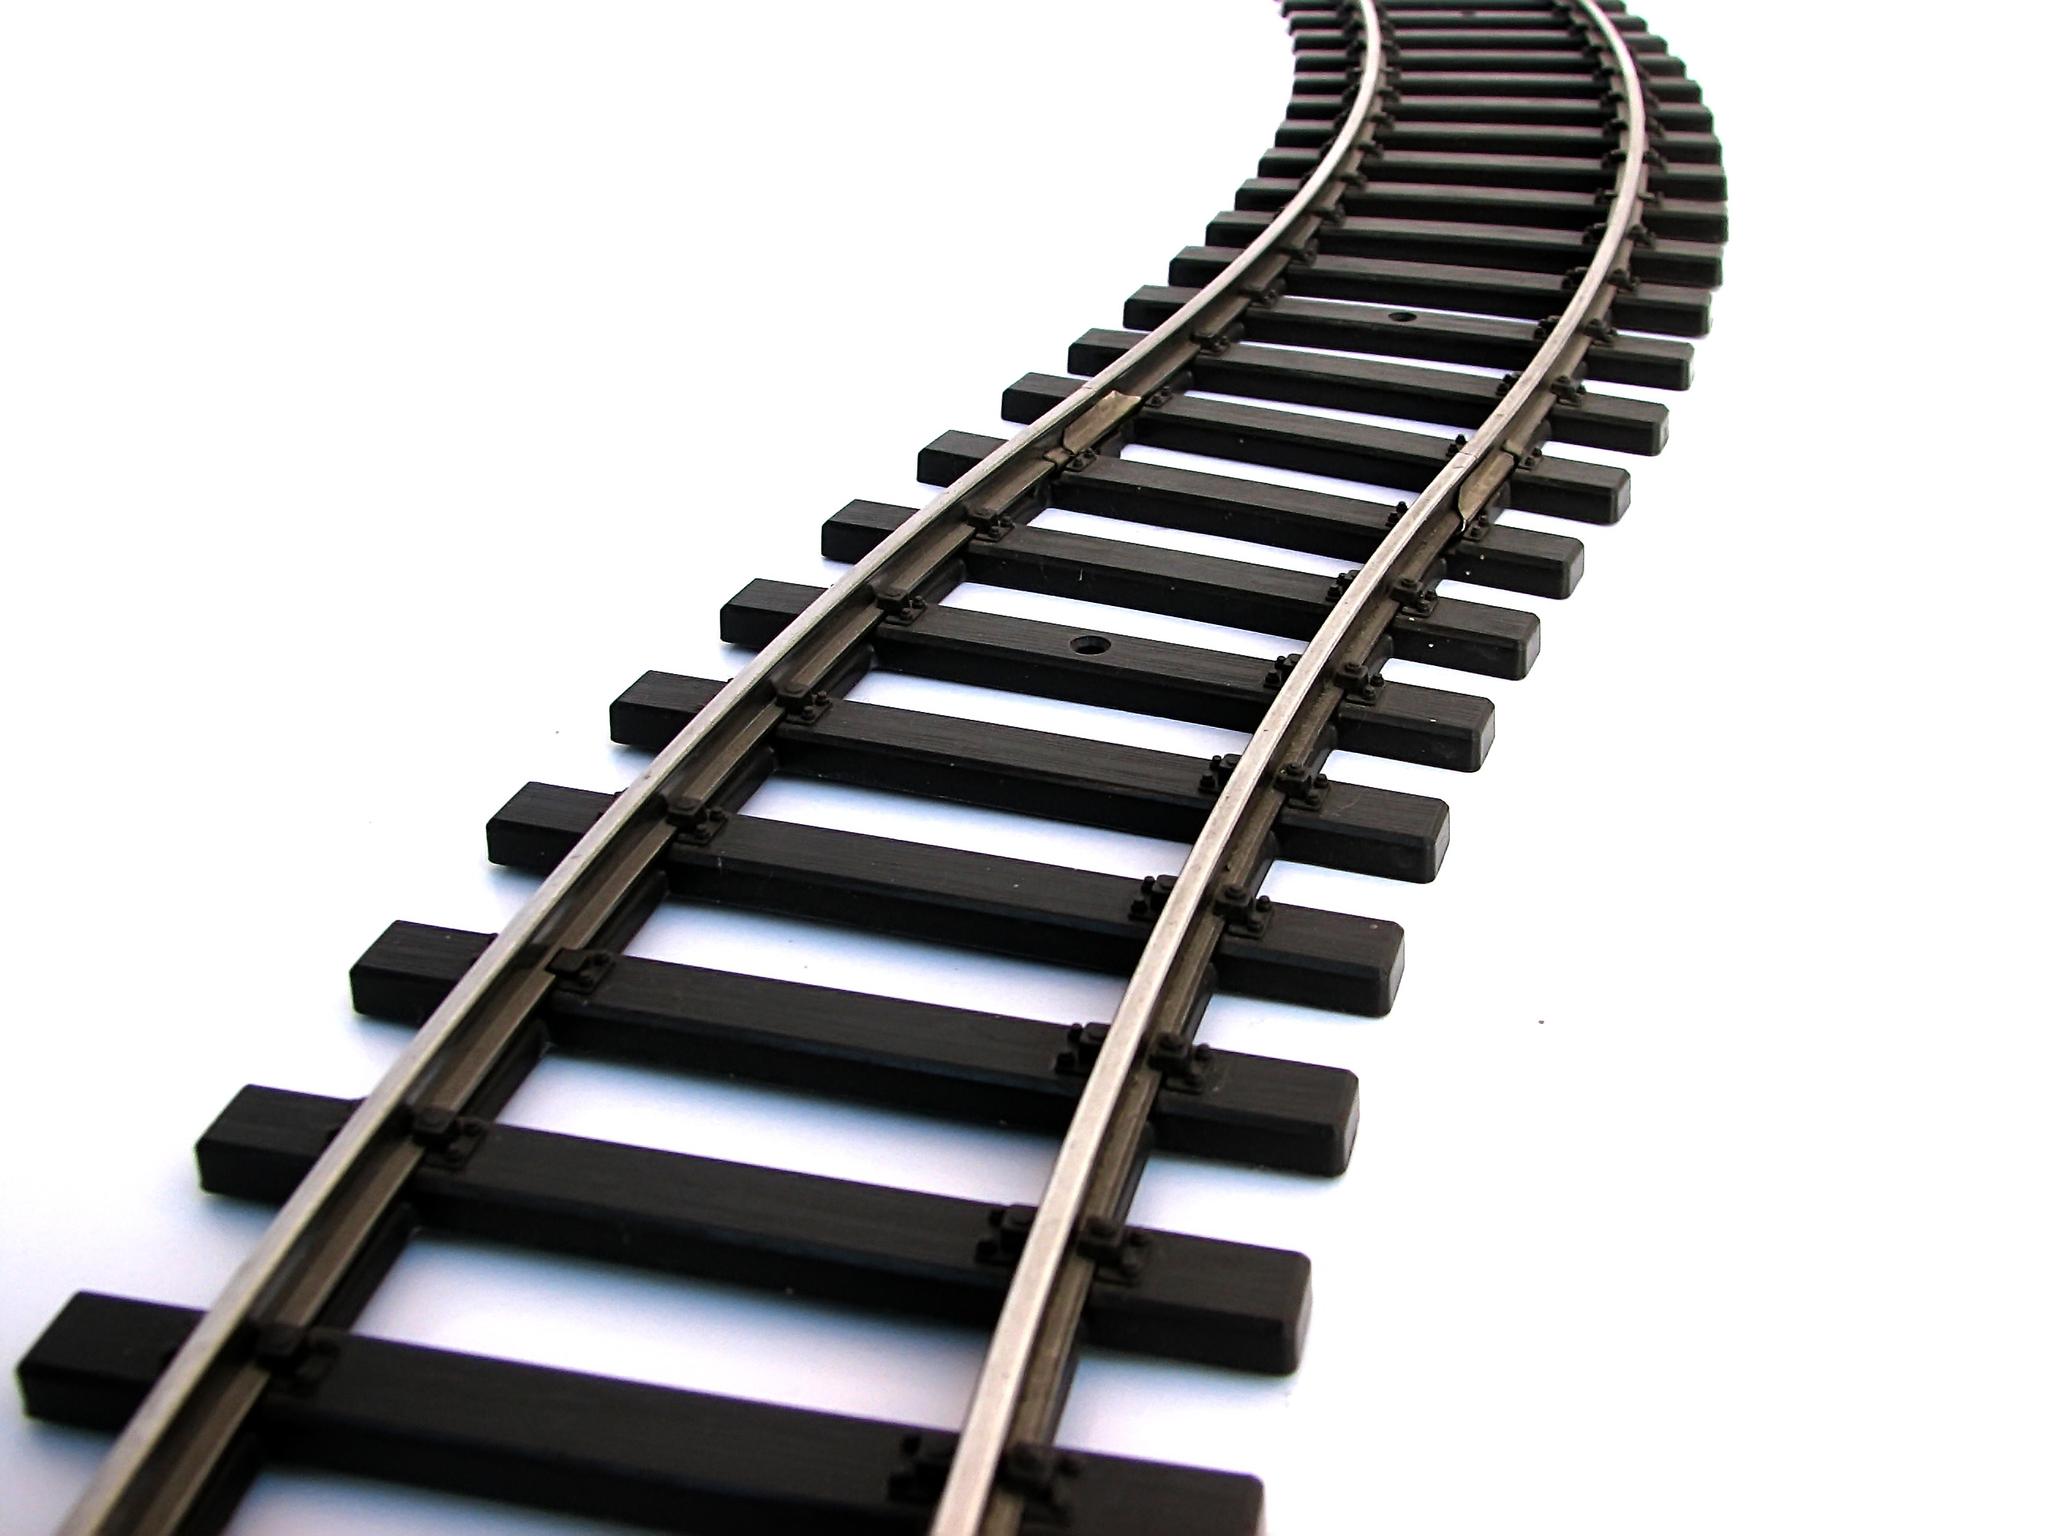 Curved Train Track Clipart